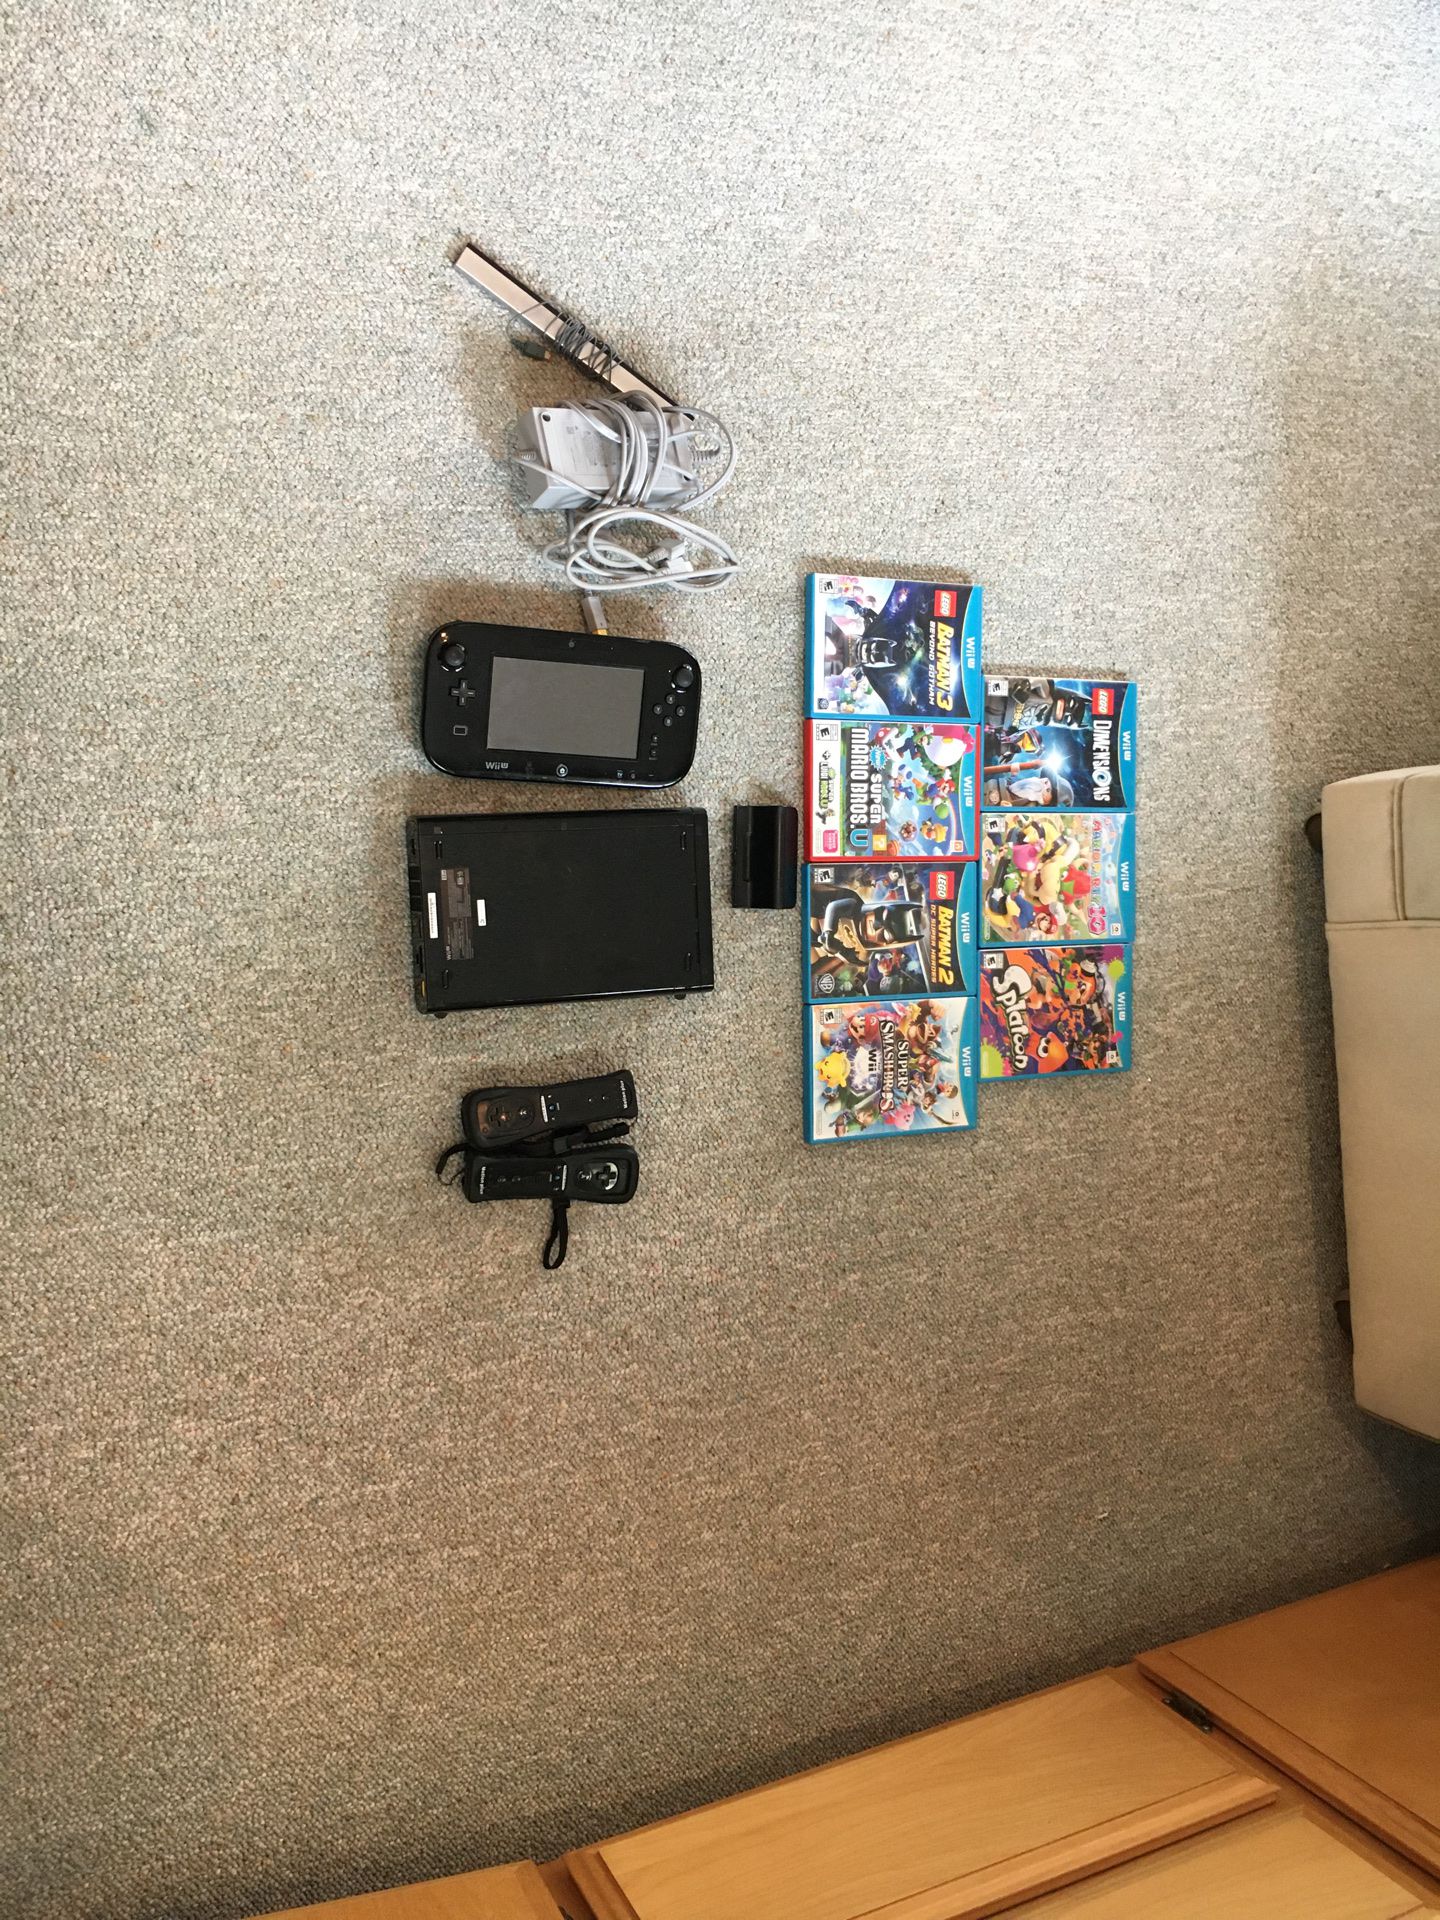 Wii U with Nintendo Land and Super Mario World 3D